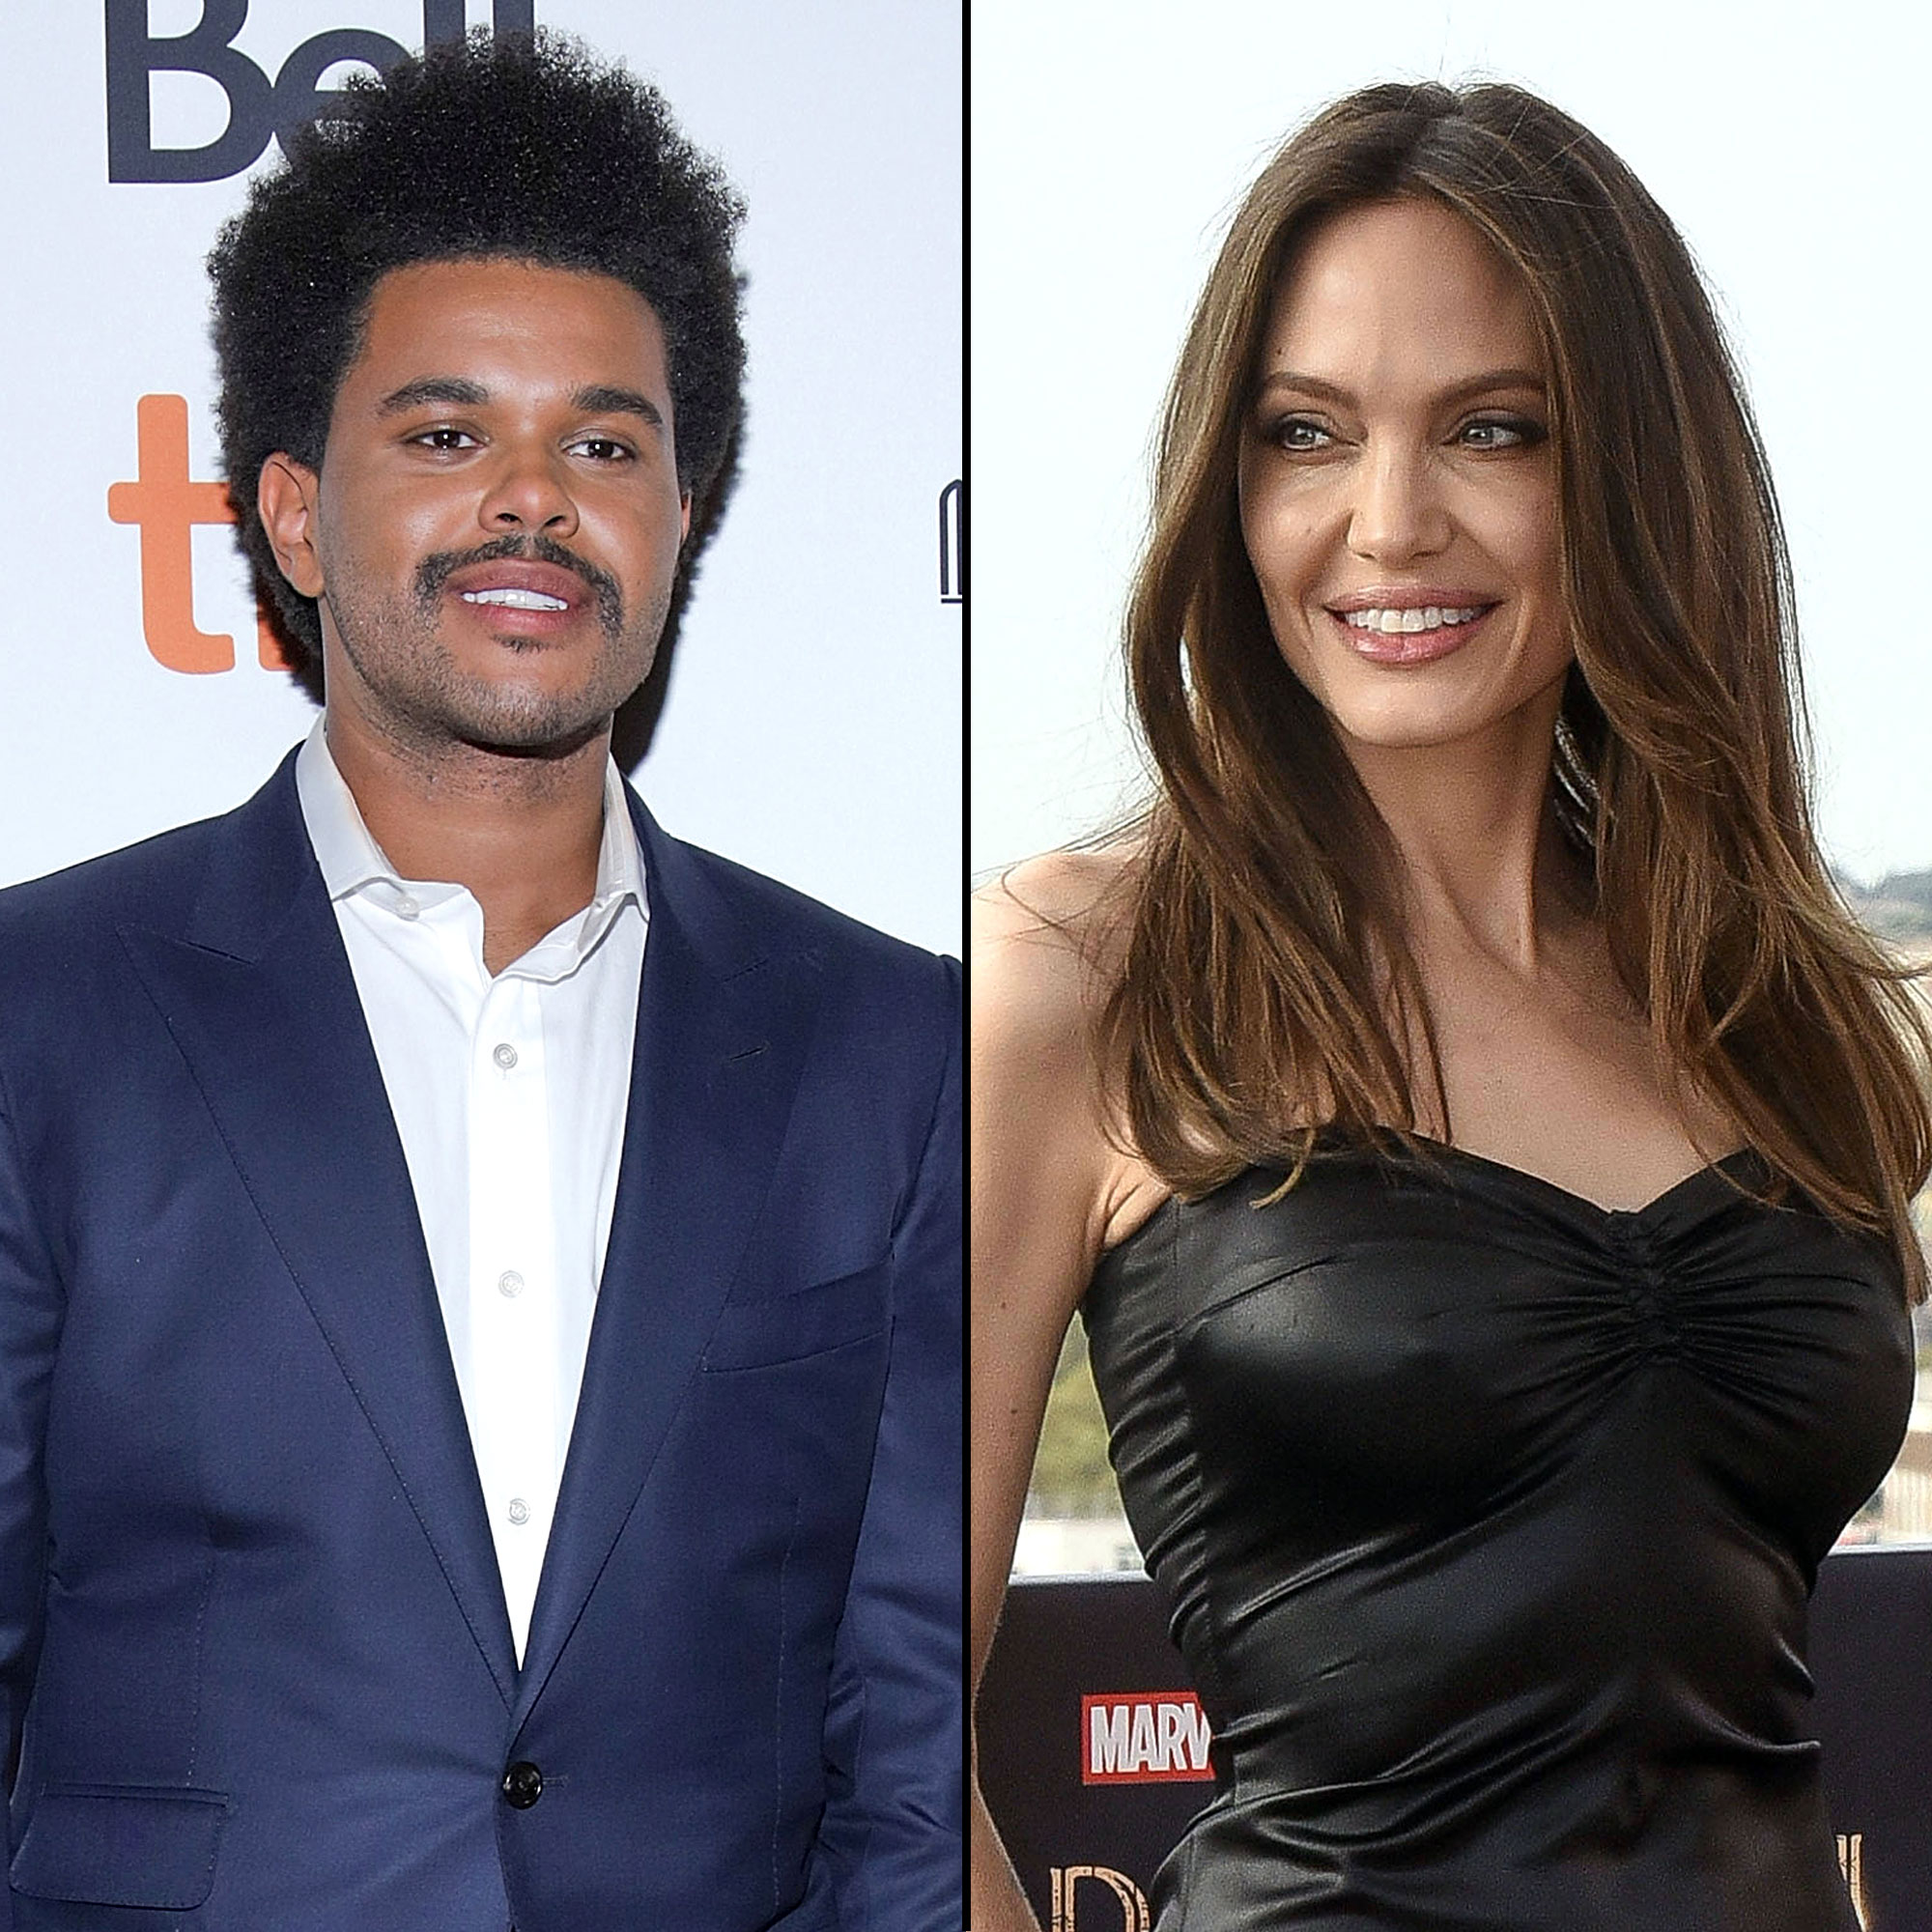 Bokef Angelina Jollie - The Weeknd Fans Think 'Dawn FM' Features Angelina Jolie Lyric